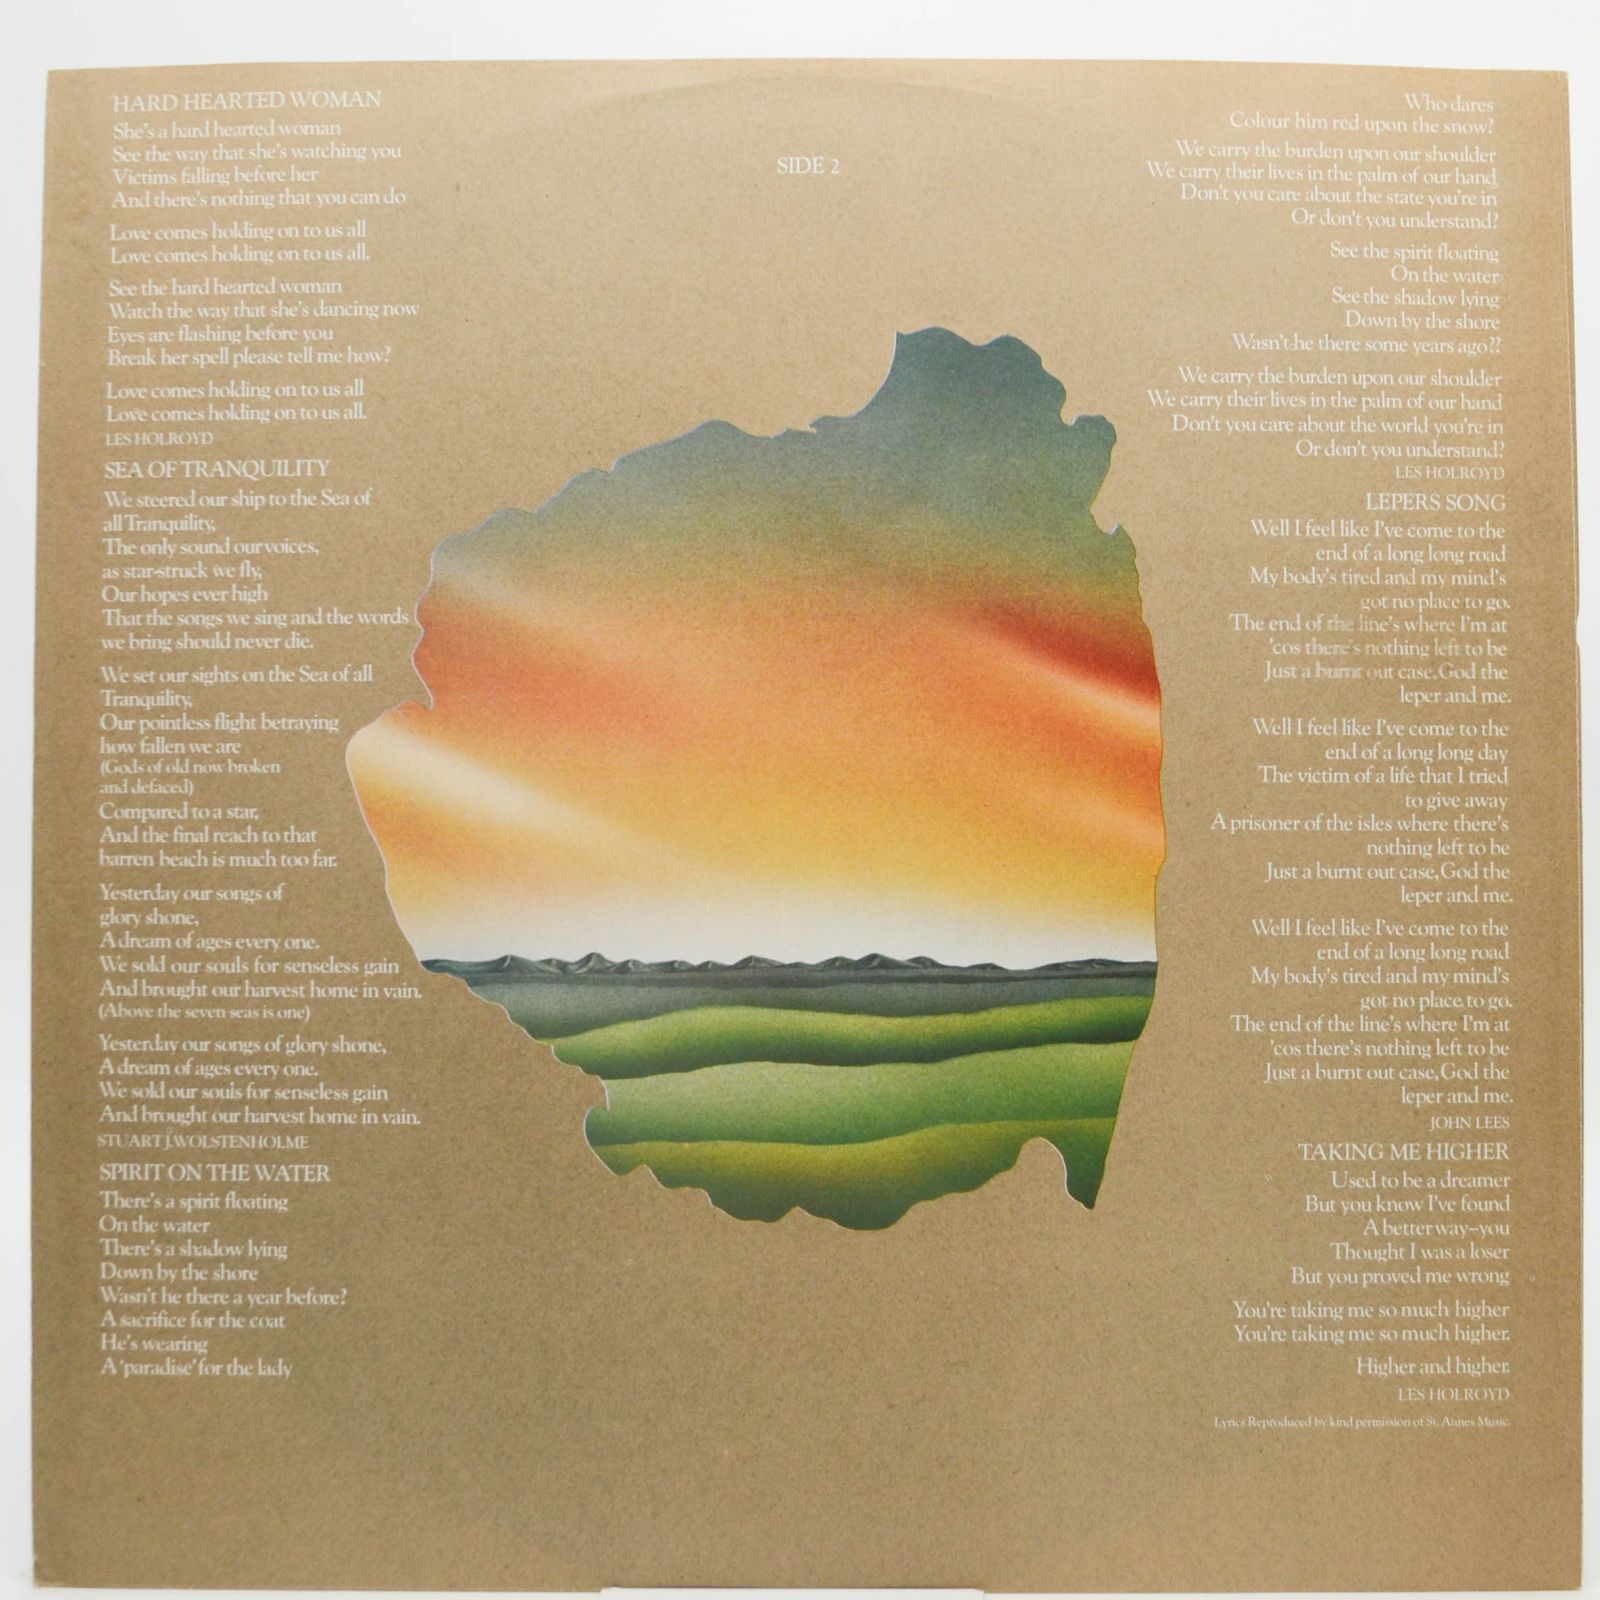 Barclay James Harvest — Gone To Earth (1-st, UK), 1977